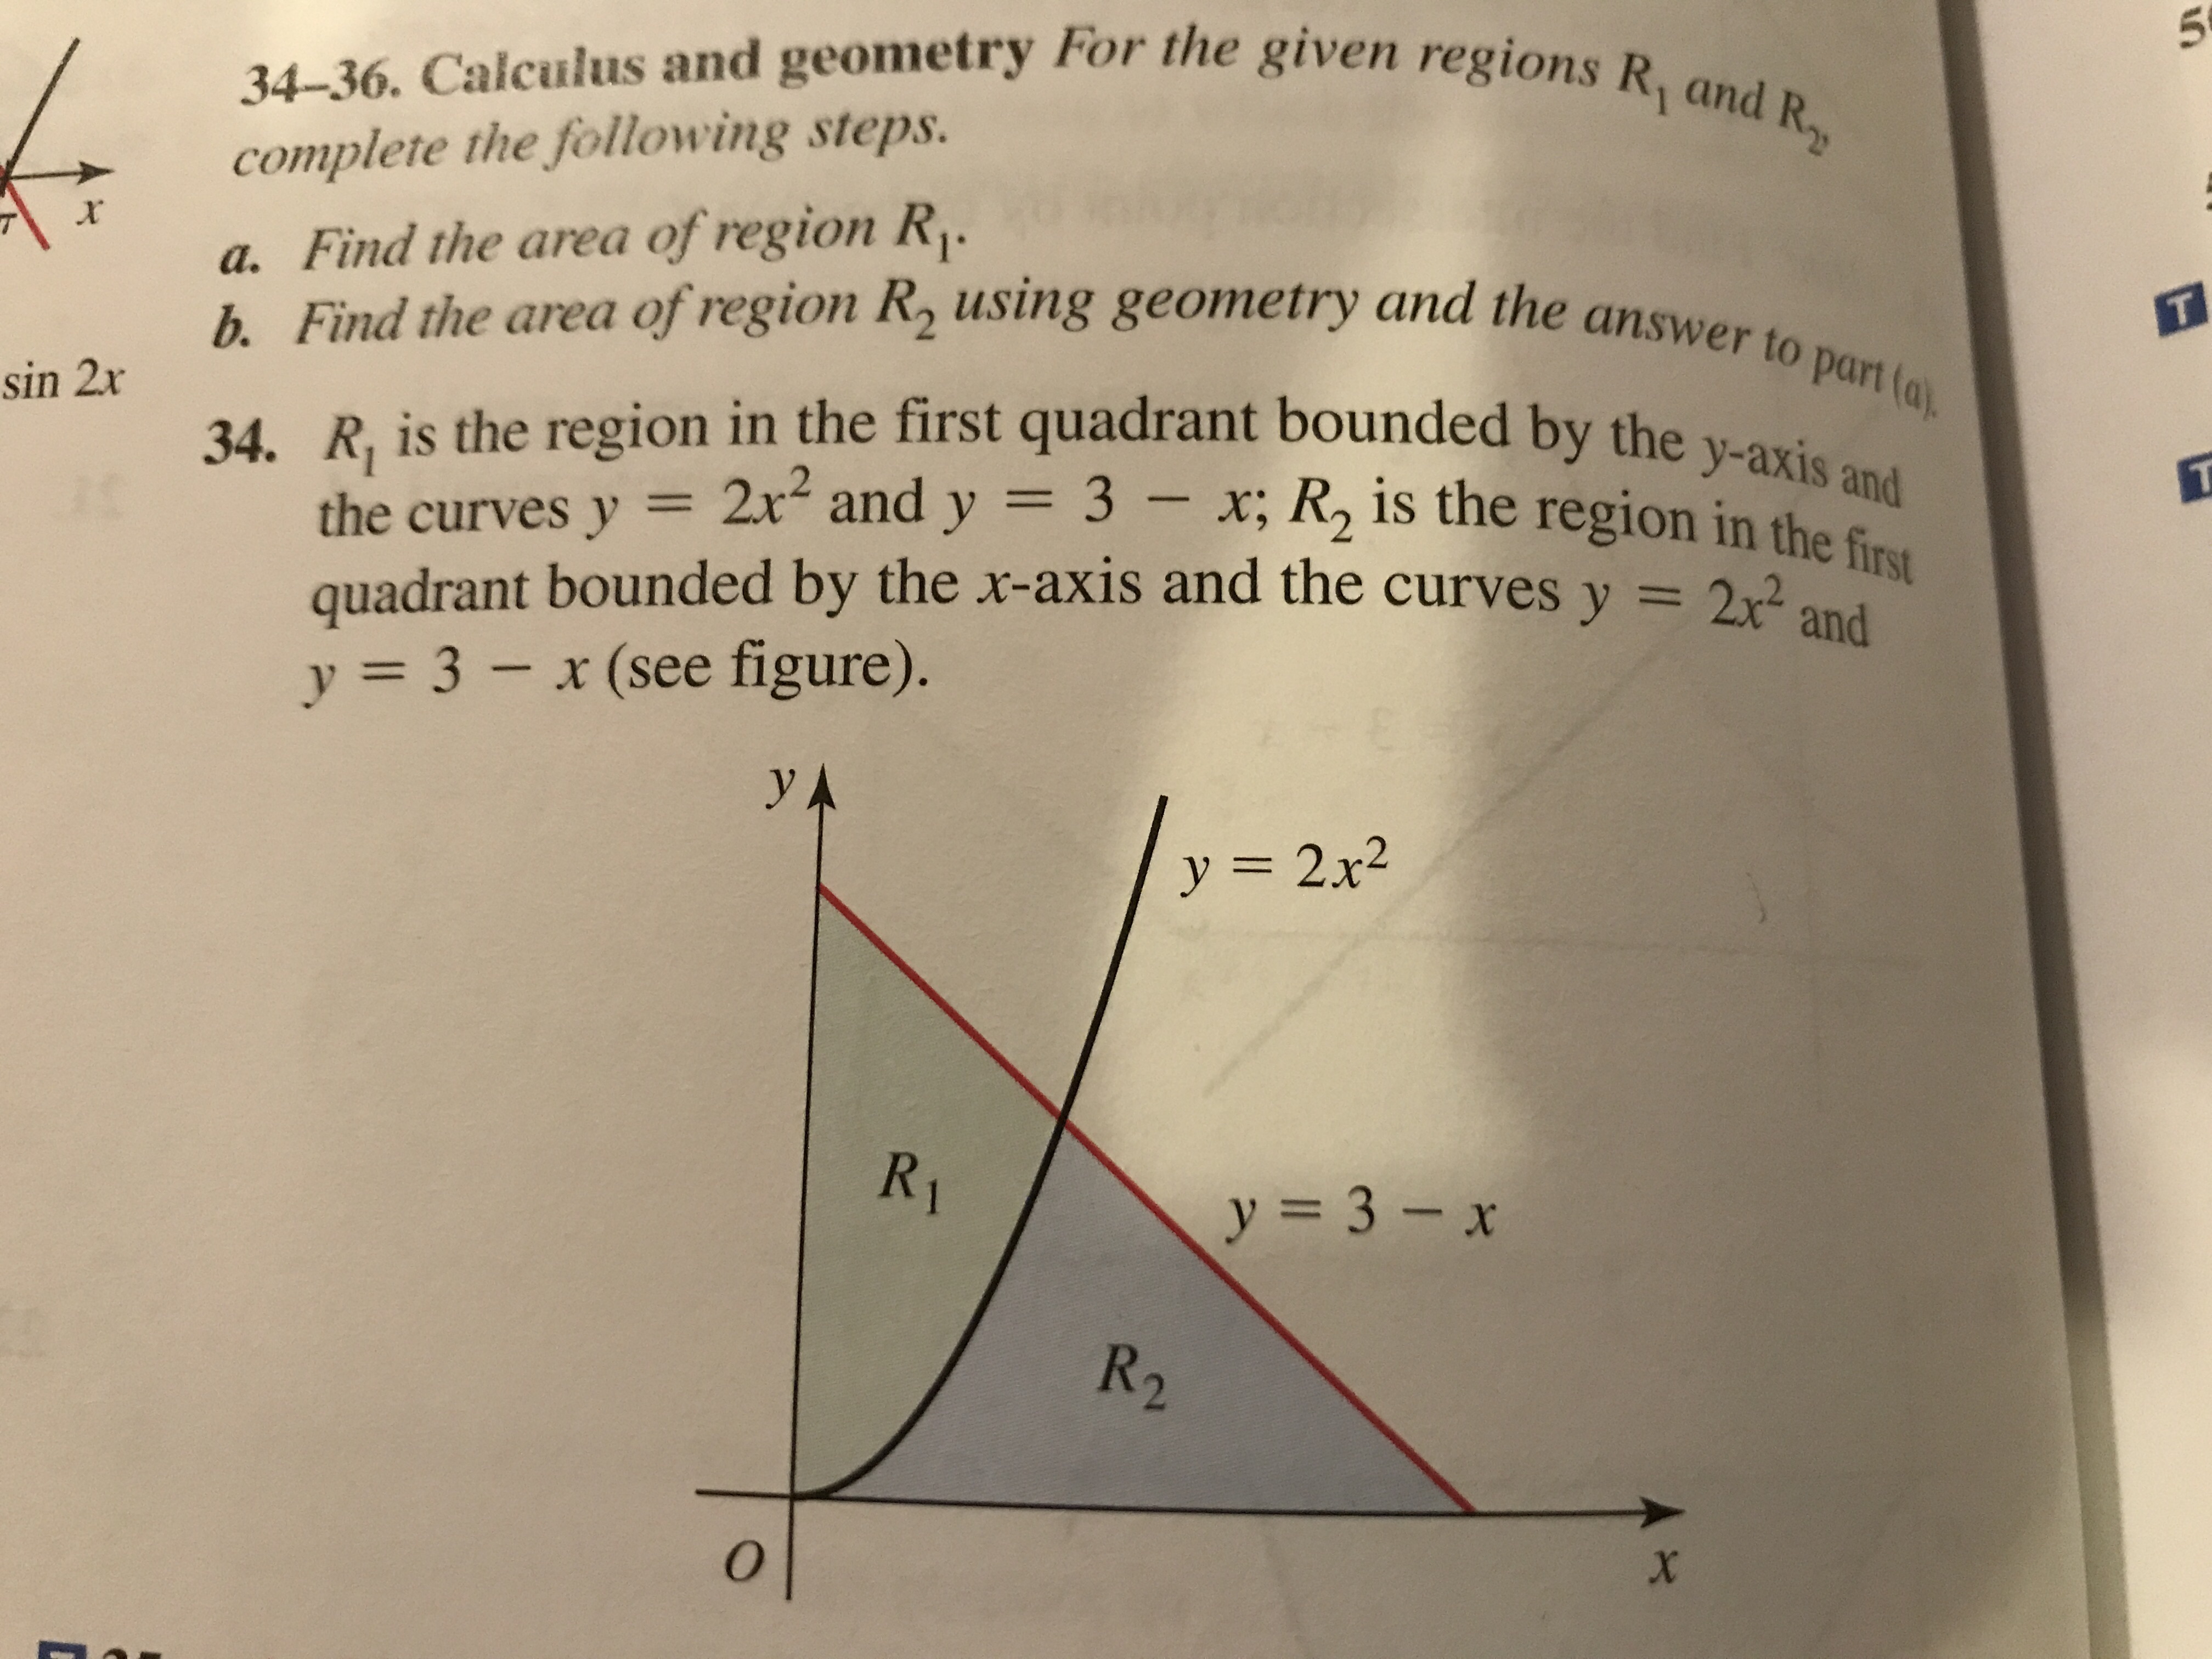 en
regions R and R
34-36. Calculus and geometry For the given regions
complete the following steps.
a. Find the area of region R
b. Find the area of'region R using geometry and the answerto
234. R, is the region in the first quadrant bounded by the
part (o
unded by the y-axis and
2r2 and y 3- x; R2 is the region in the firy
quadrant bounded by the x-axis and the curves y = 2x2
y-: 3-x (see figure)
and
y 2x2
